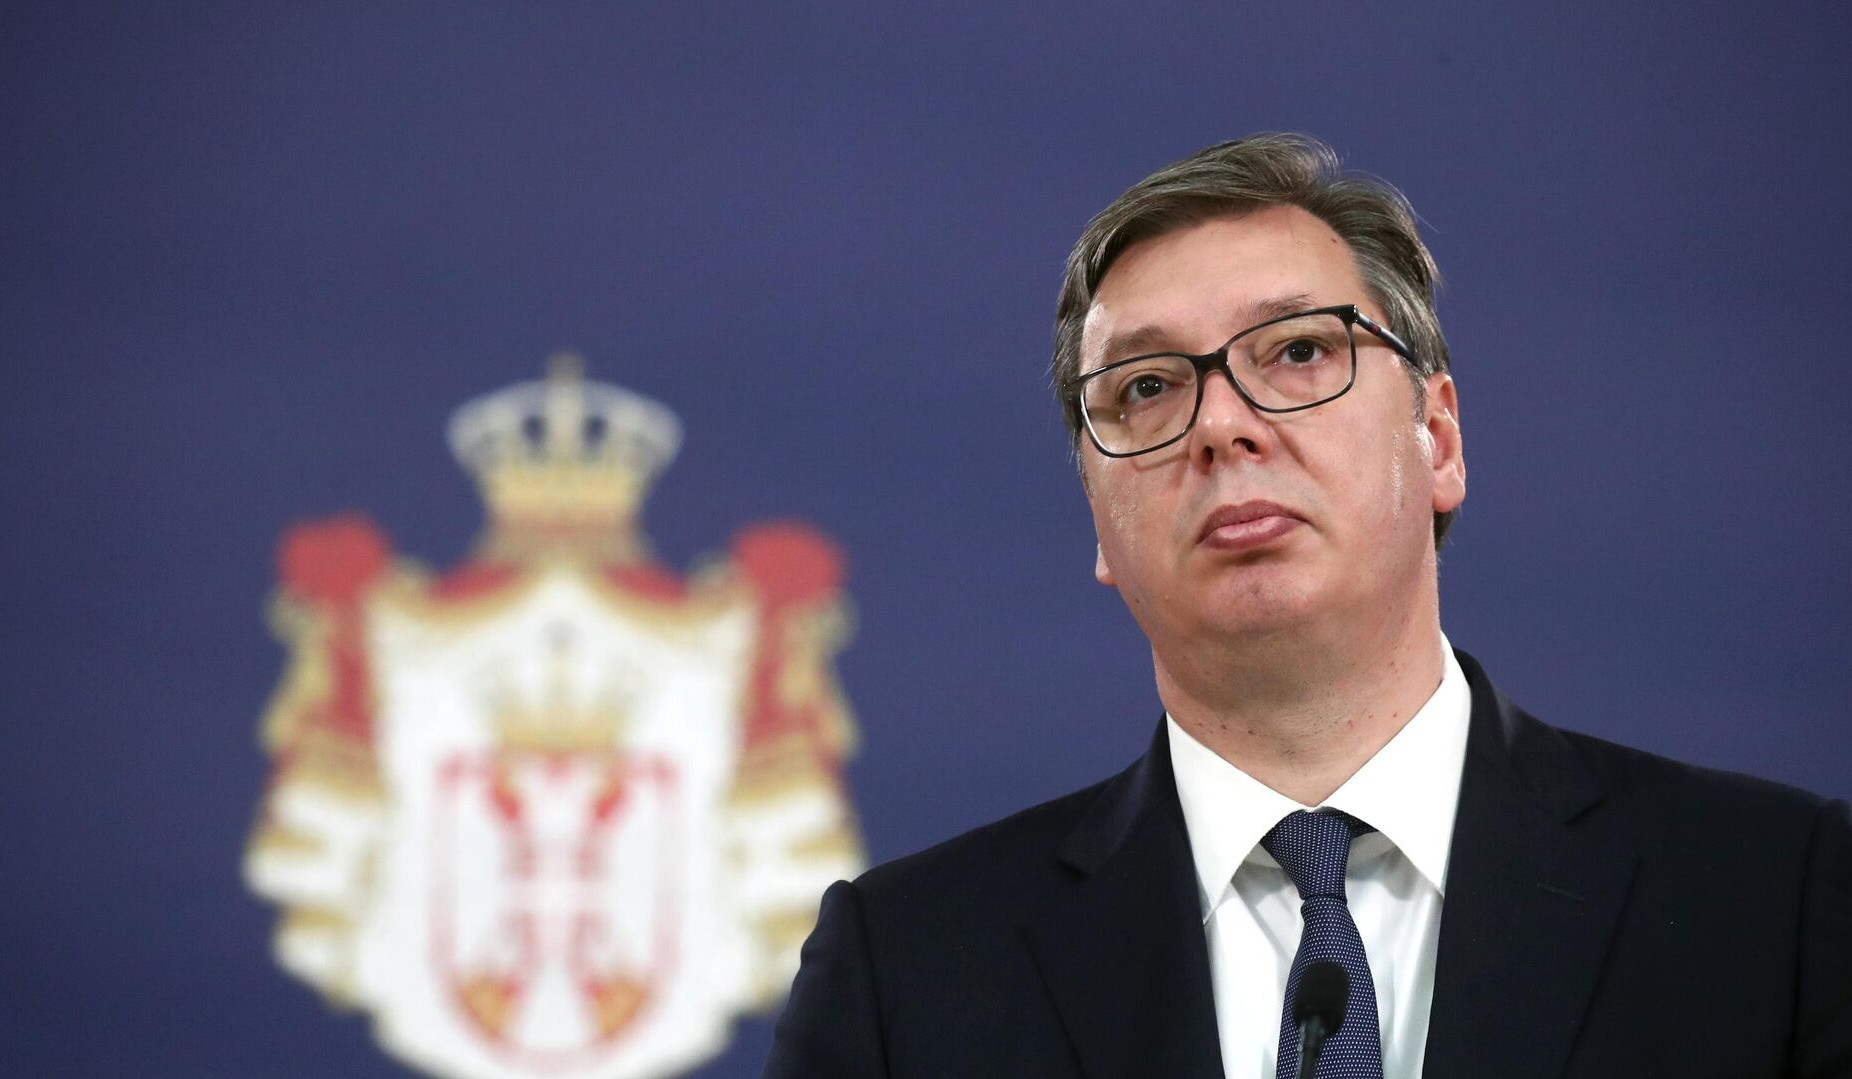 Vucic says he will not support independence of Kosovo